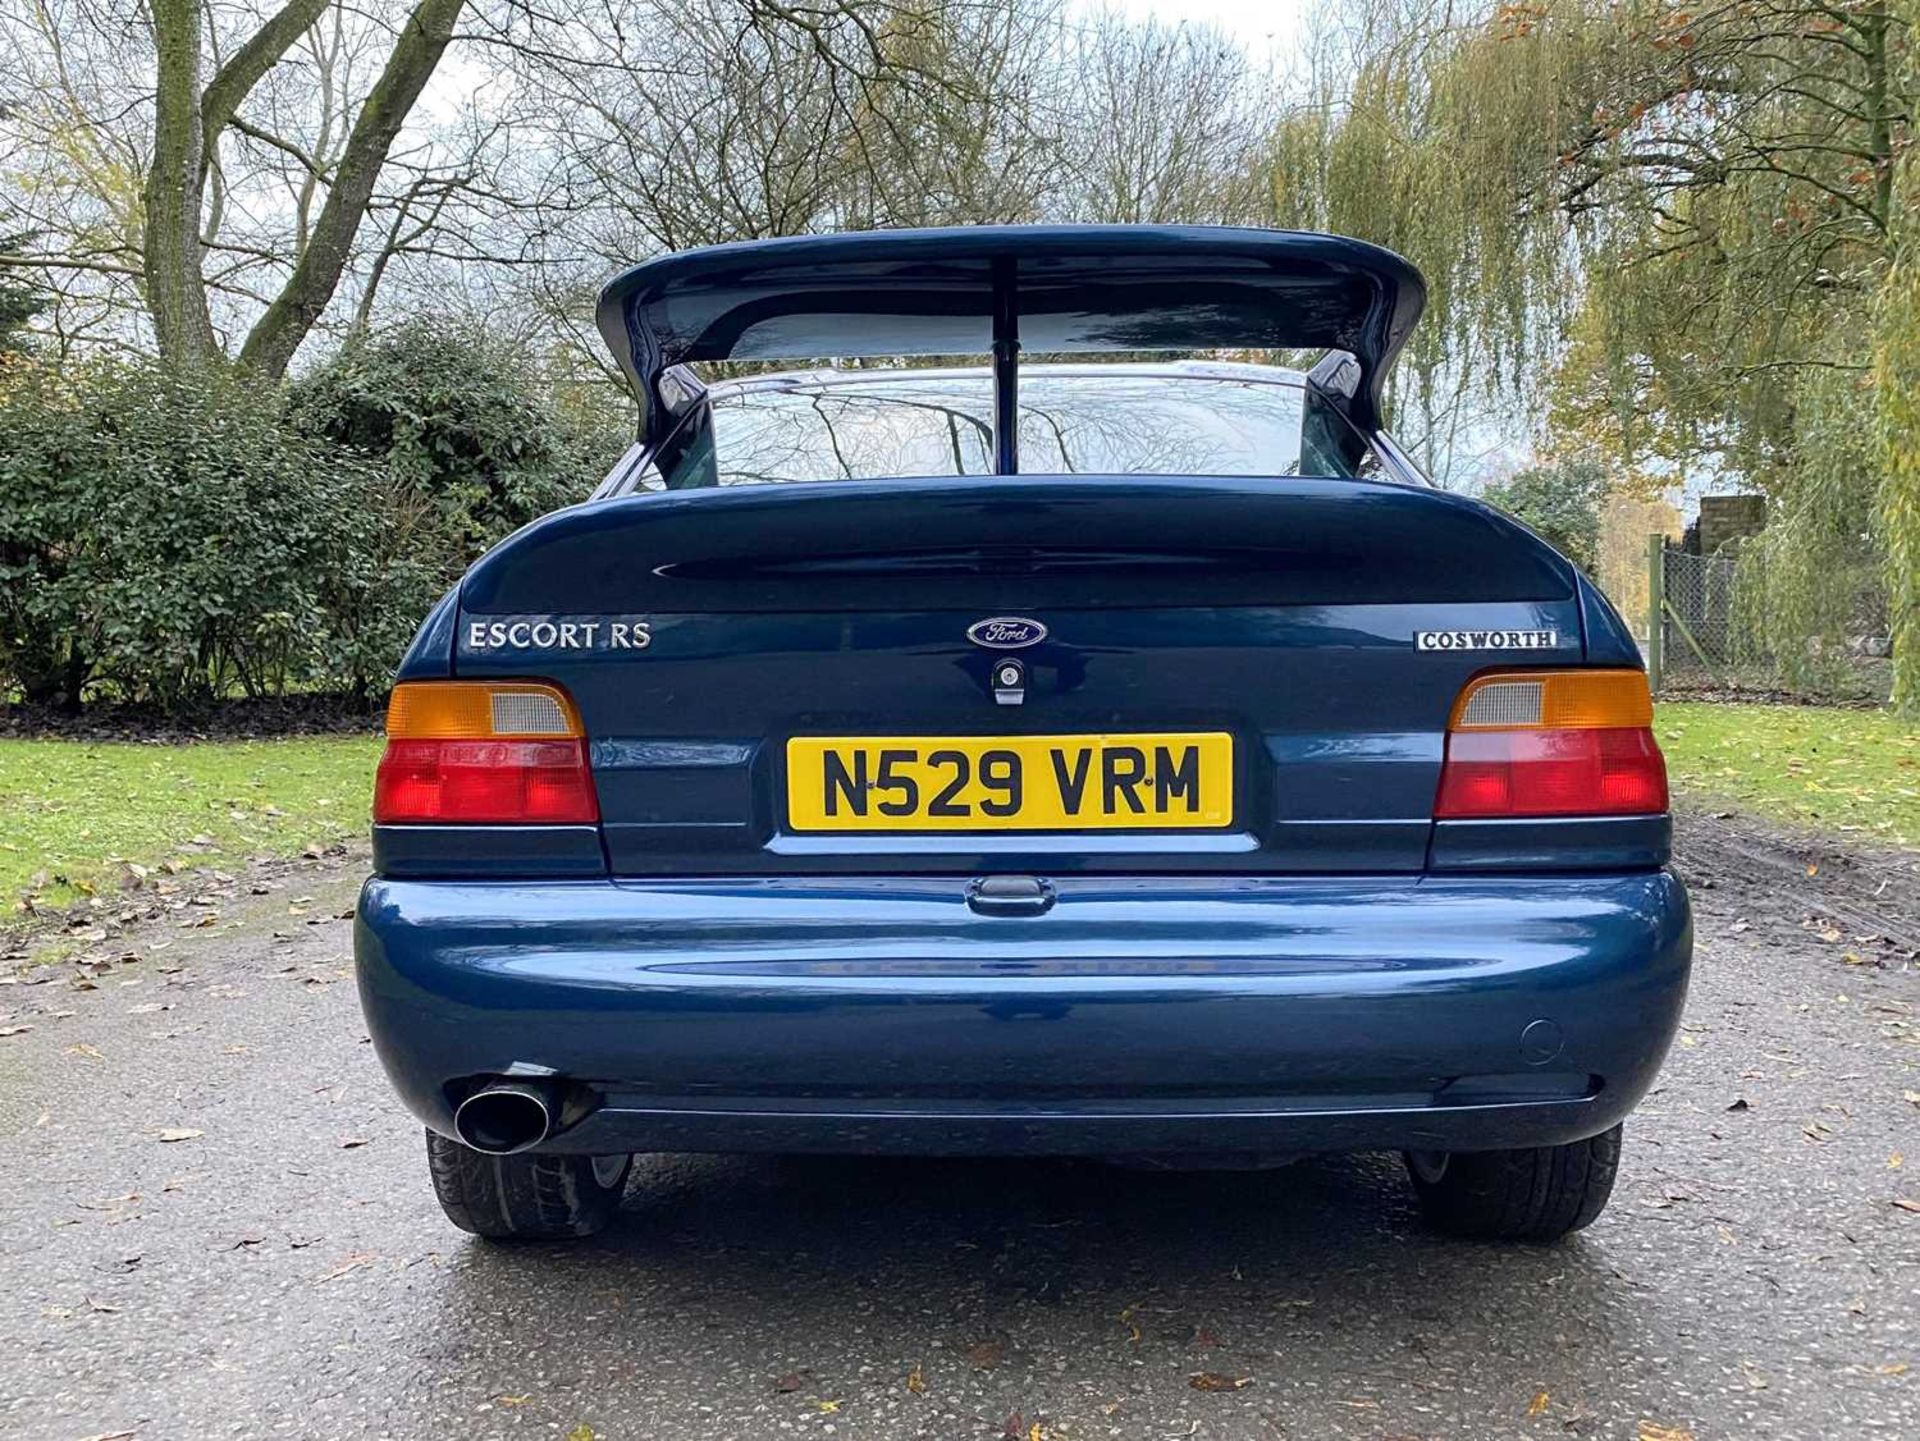 1995 Ford Escort RS Cosworth LUX Only 56,000 miles, finished in rare Petrol Blue - Image 16 of 98